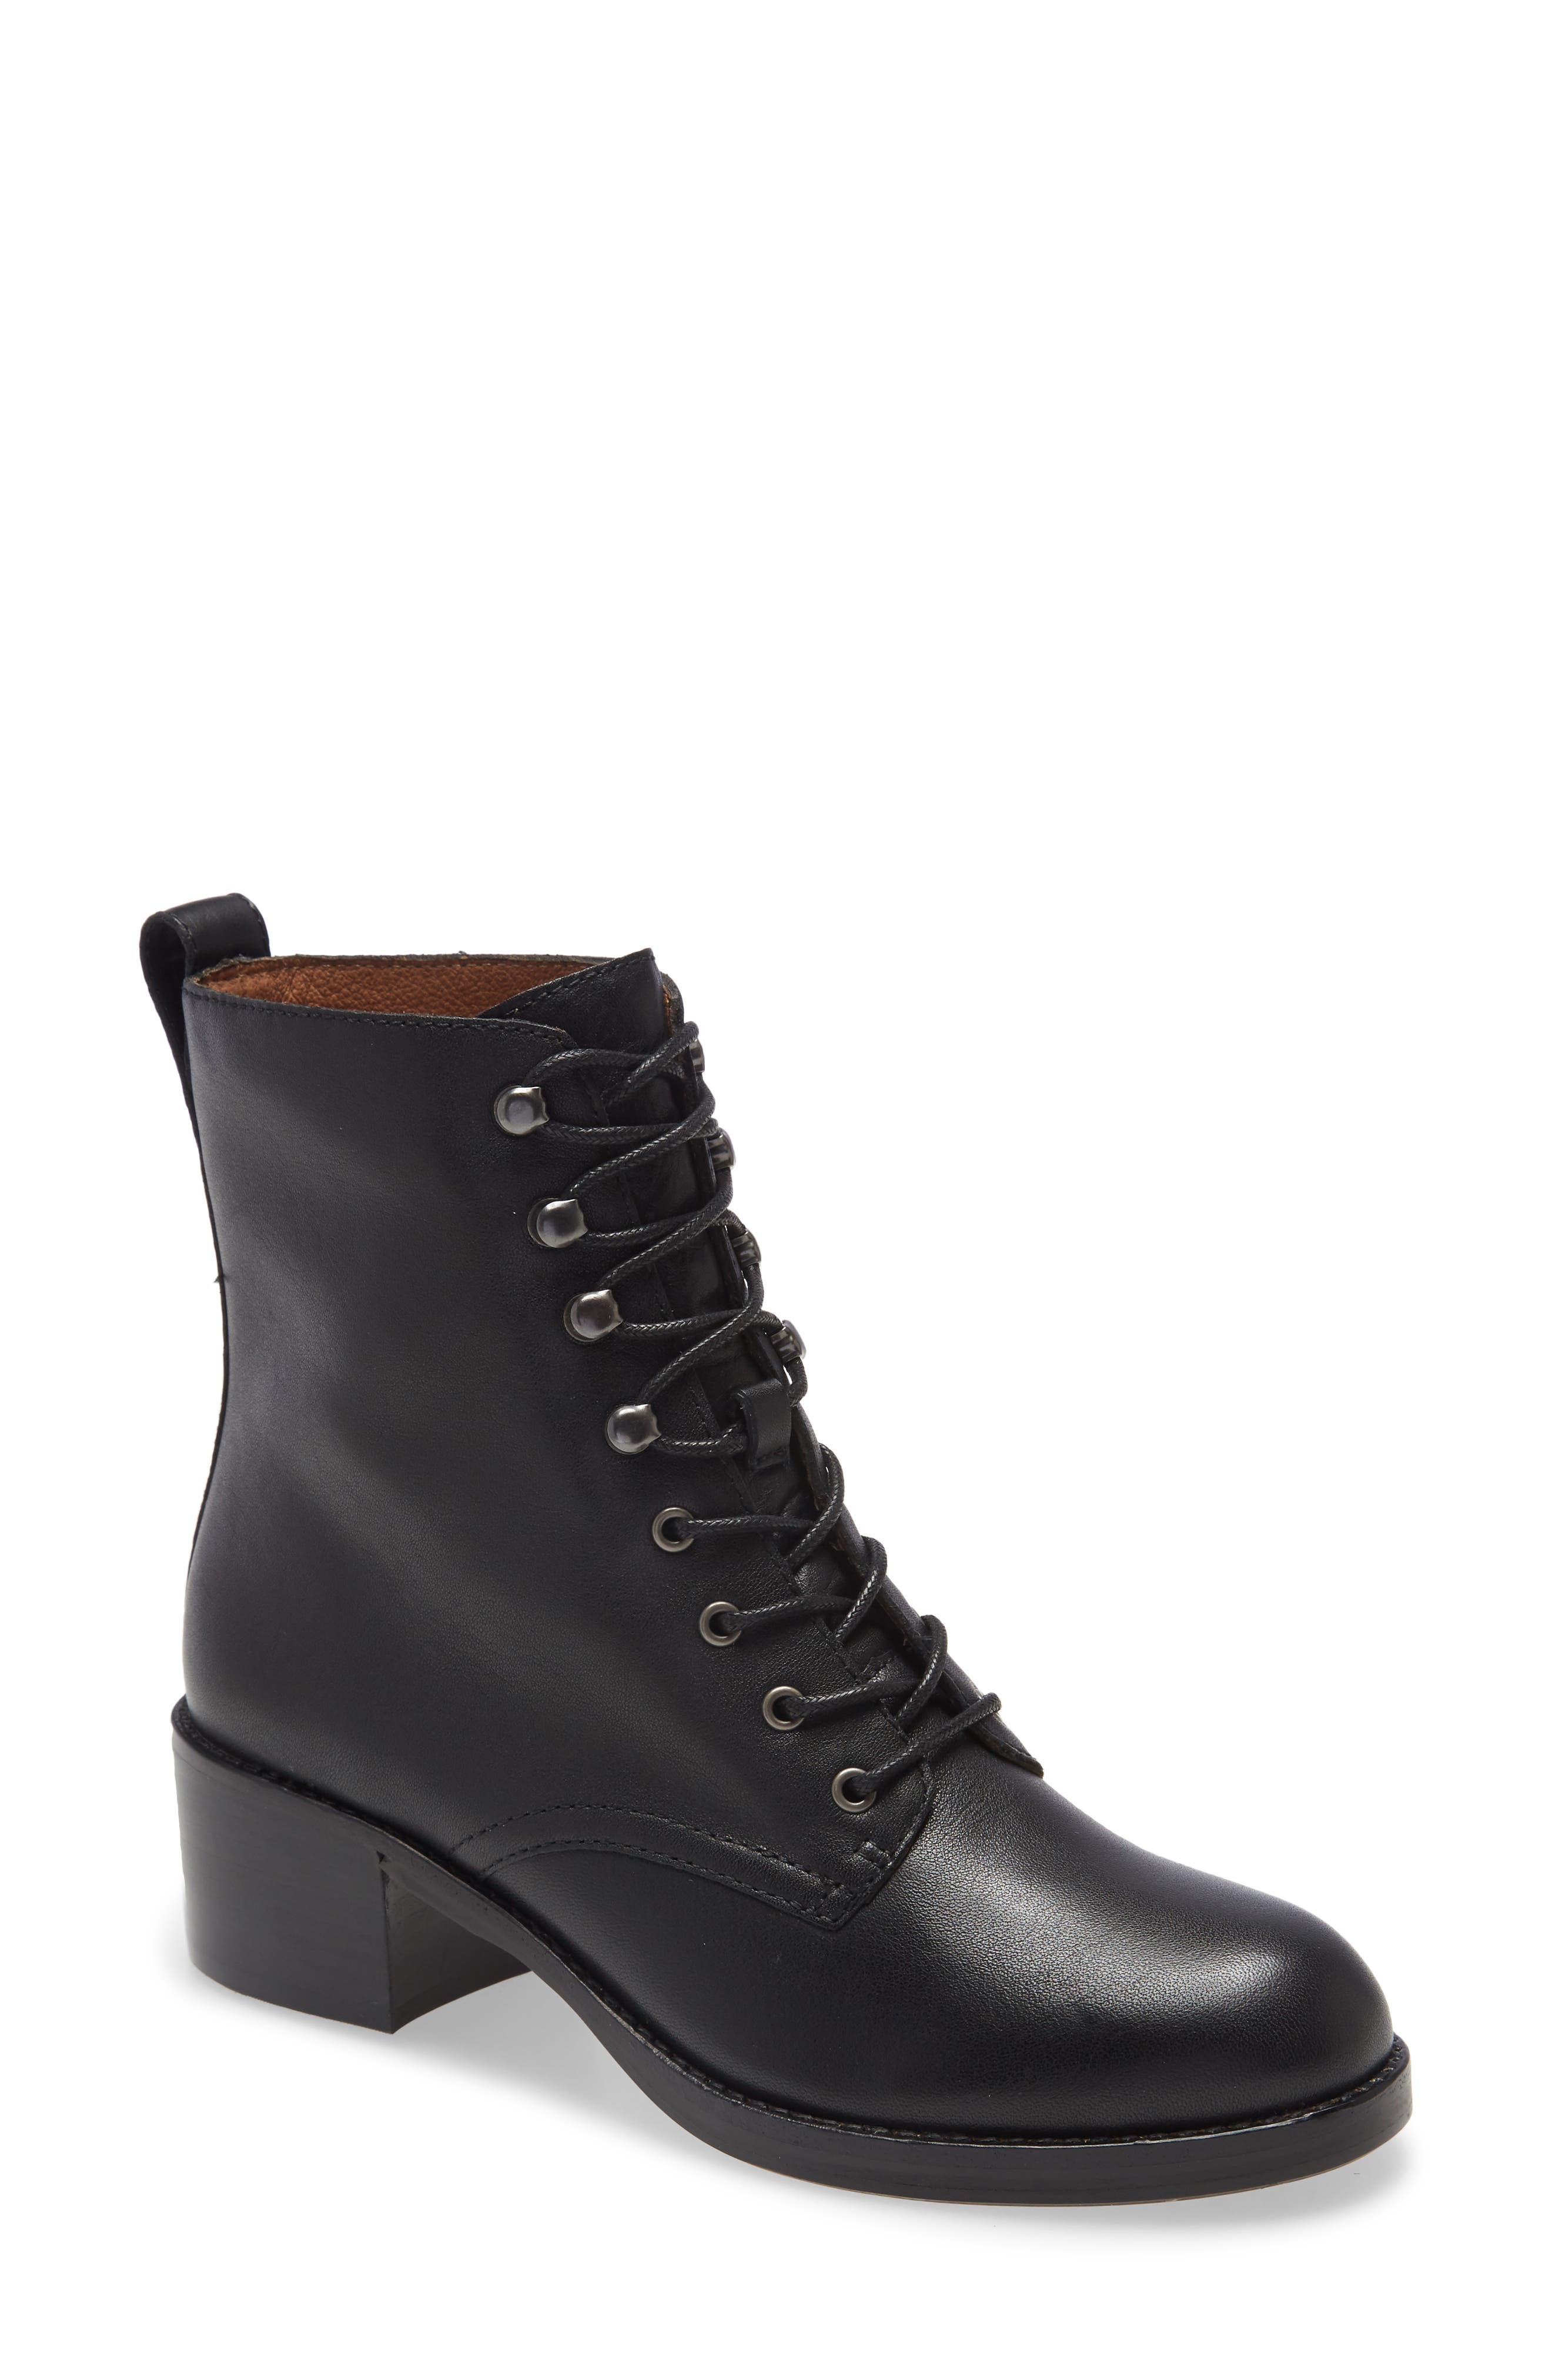 madewell combat boots